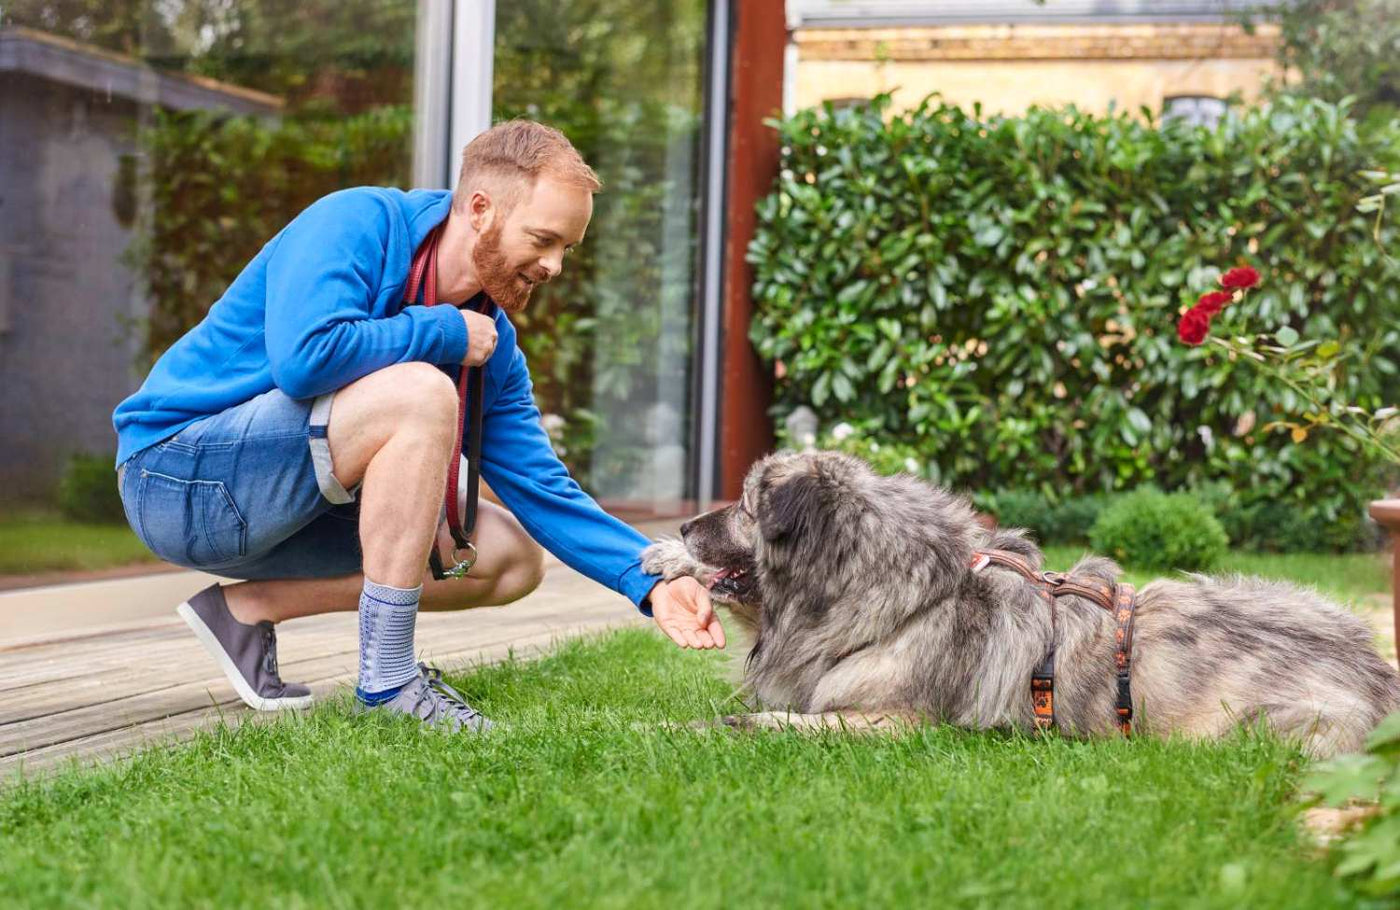 Man playing with his dog in the backyard. He is wearing the AchilloTrain Ankle Brace to help manage Achilles ankle pain.